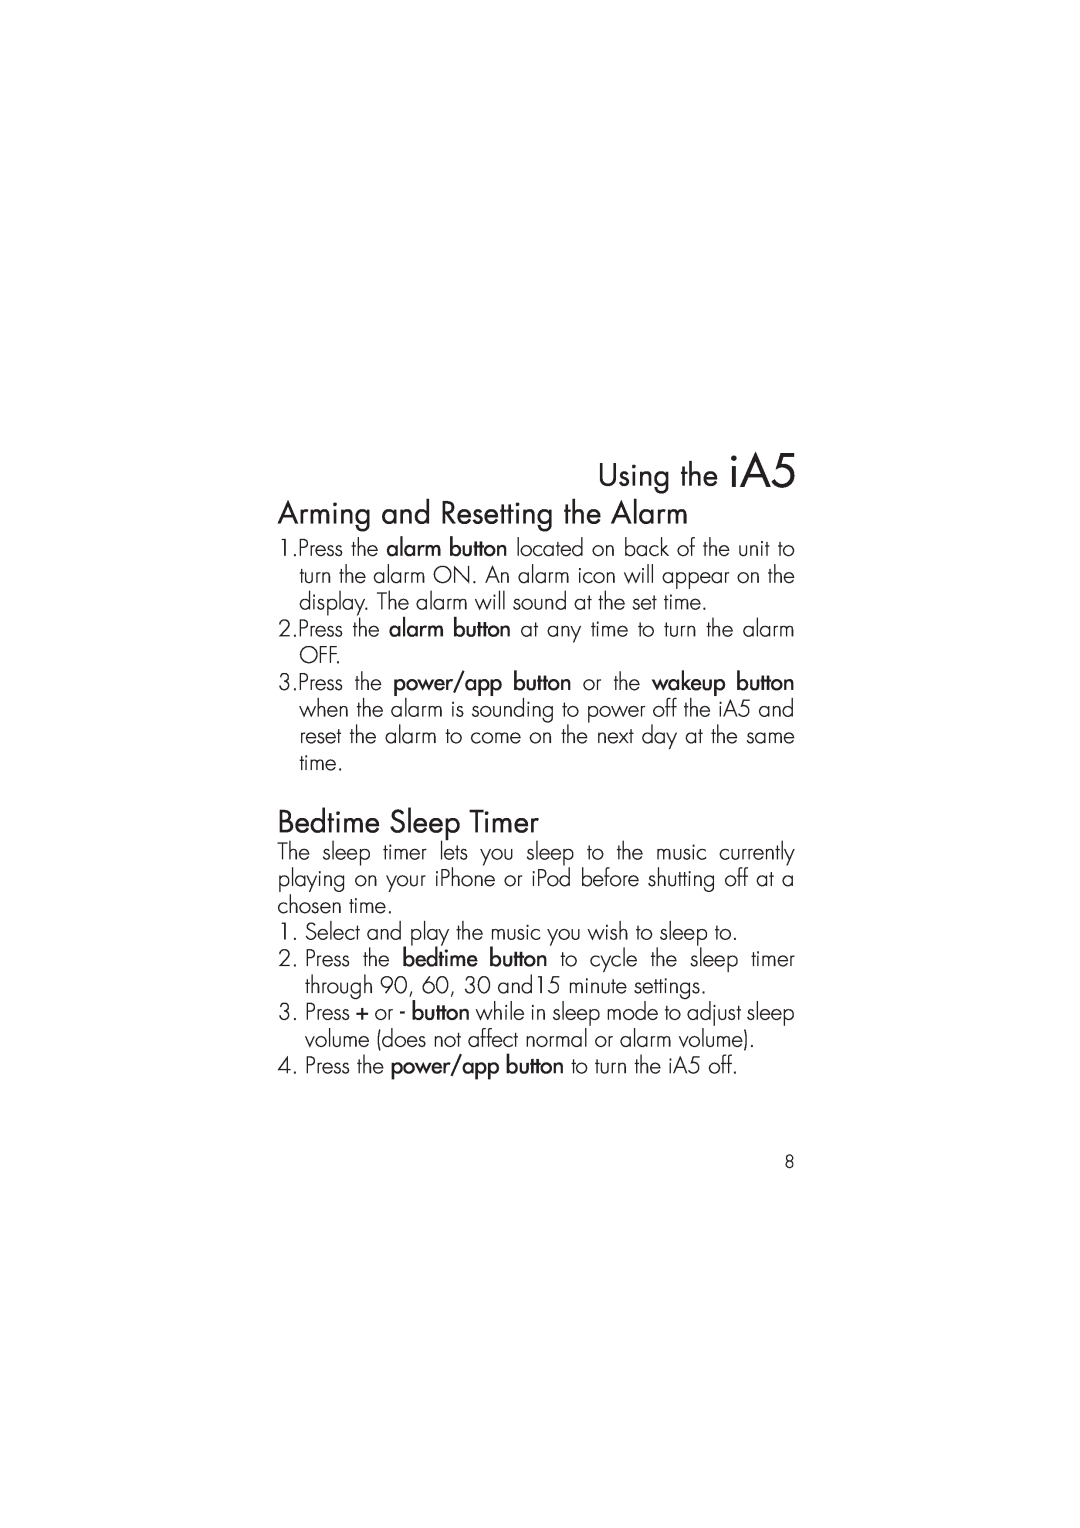 iHome ia5 instruction manual Using the iA5 Arming and Resetting the Alarm, Bedtime Sleep Timer 